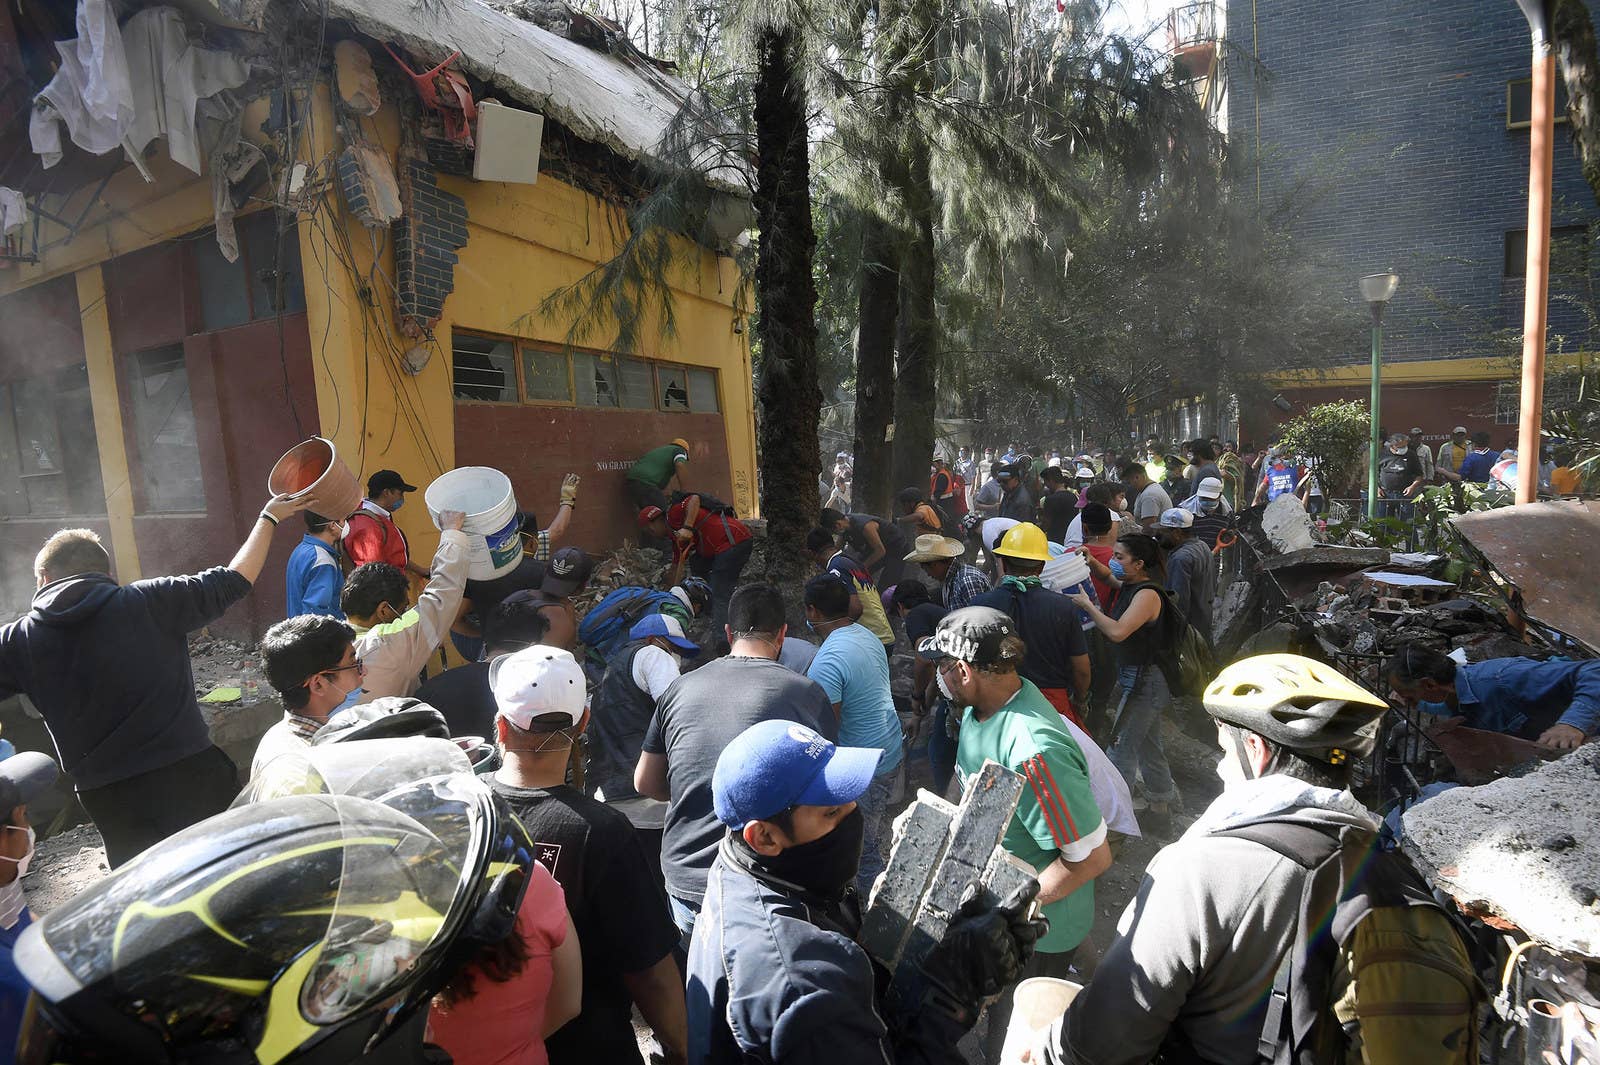 Rescuers and volunteers remove rubble and debris from a flattened building in search of survivors.